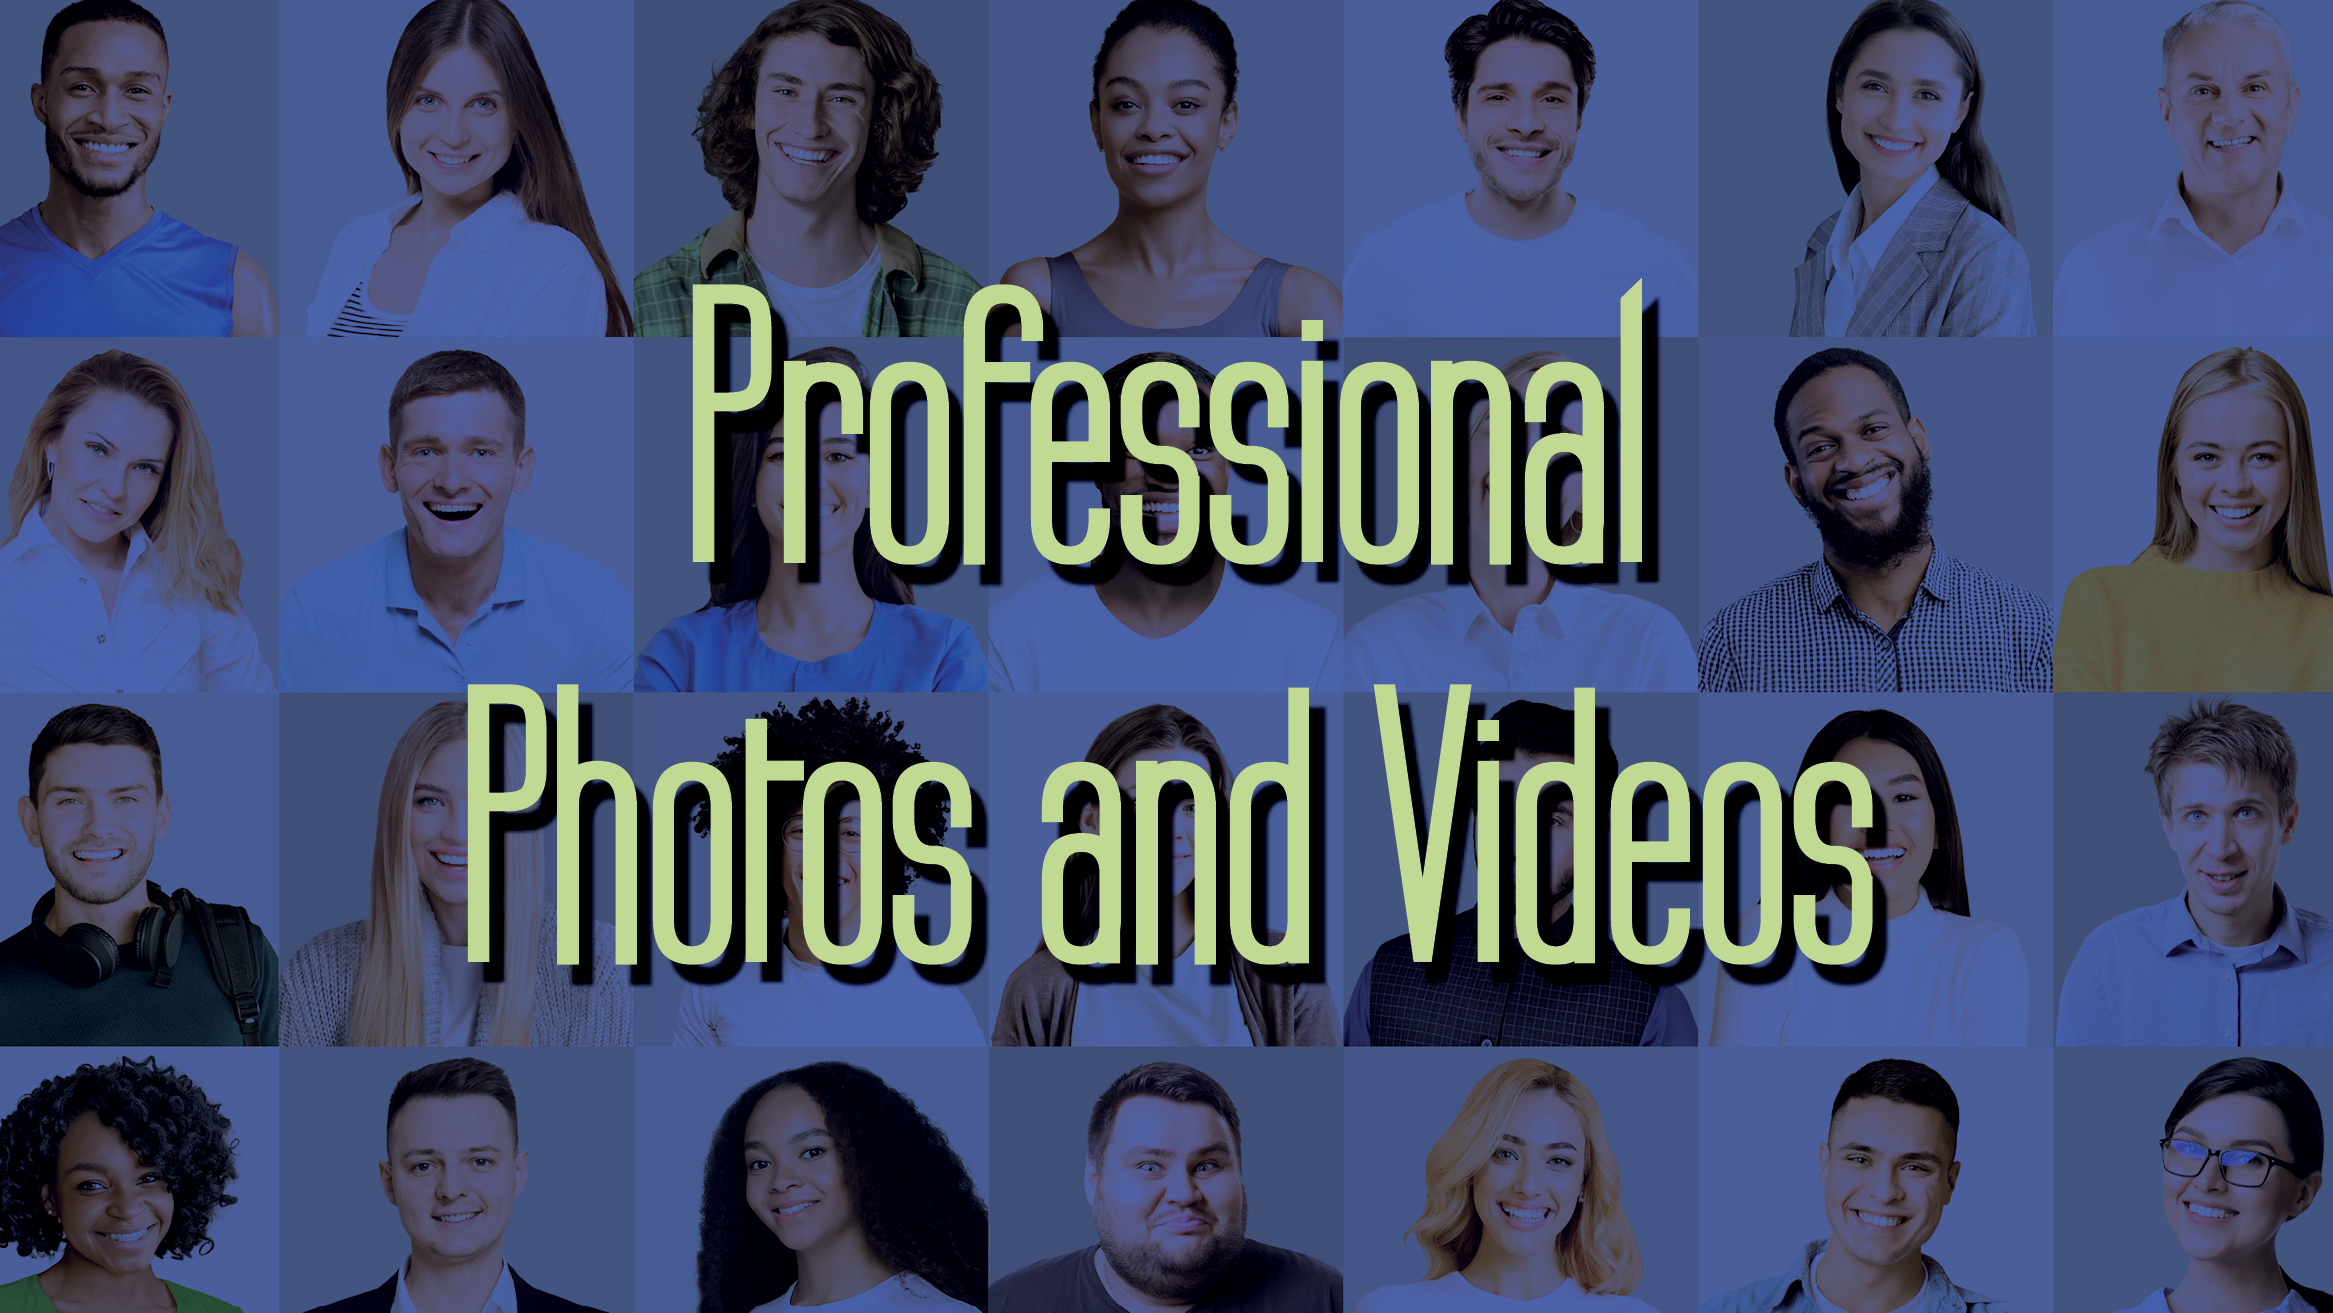 Professional Photos and Videos